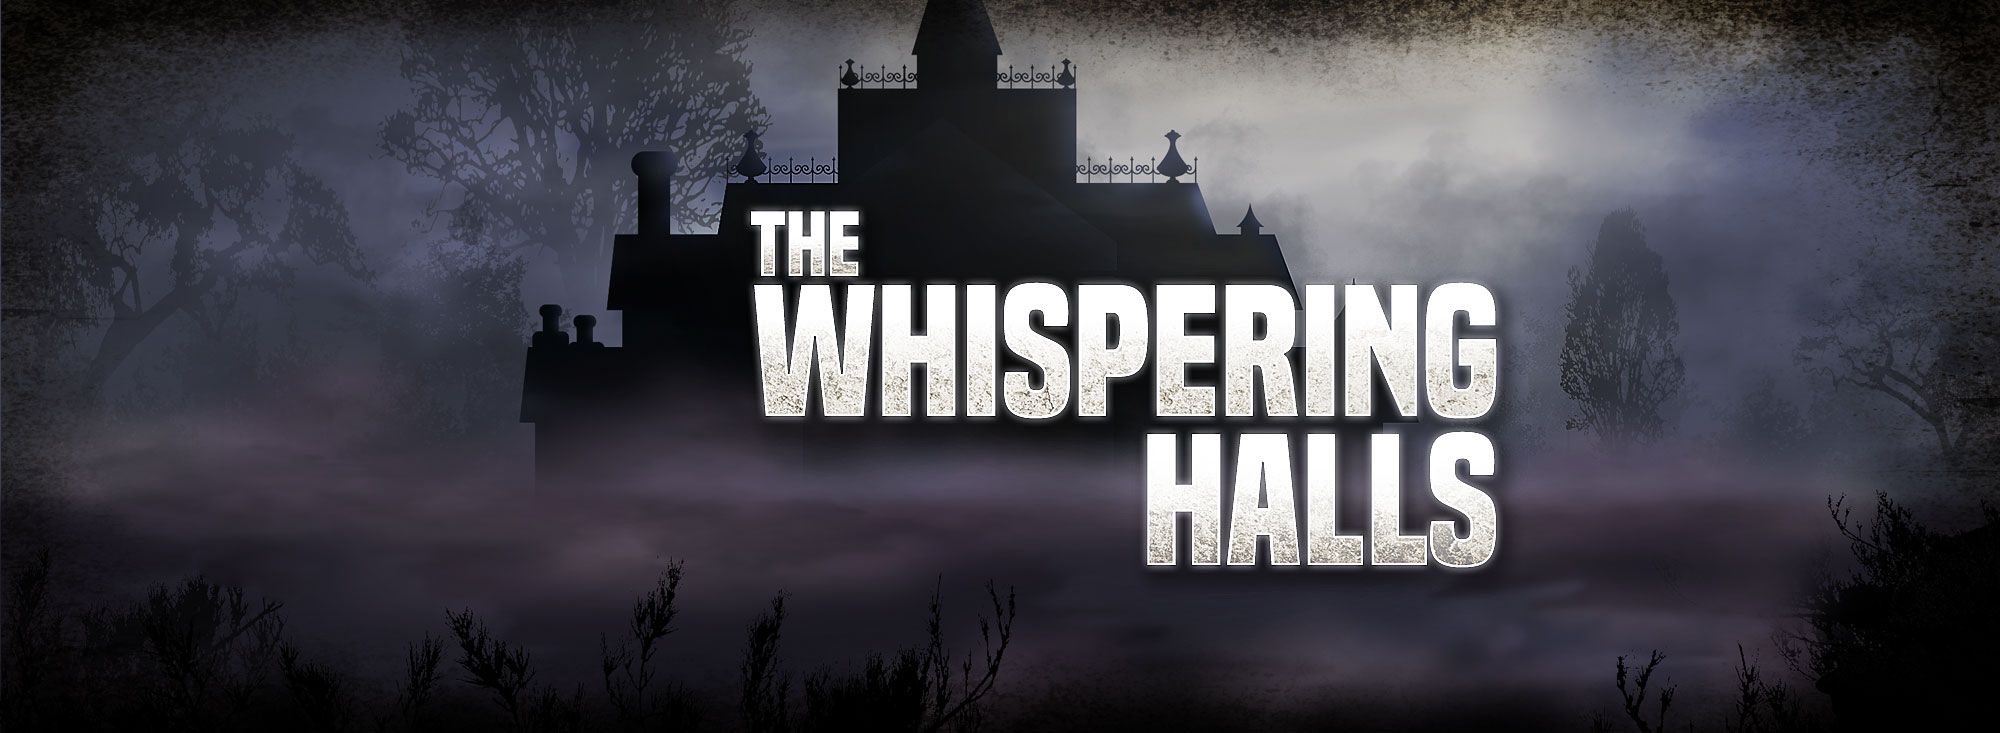 the whispering halls escape room